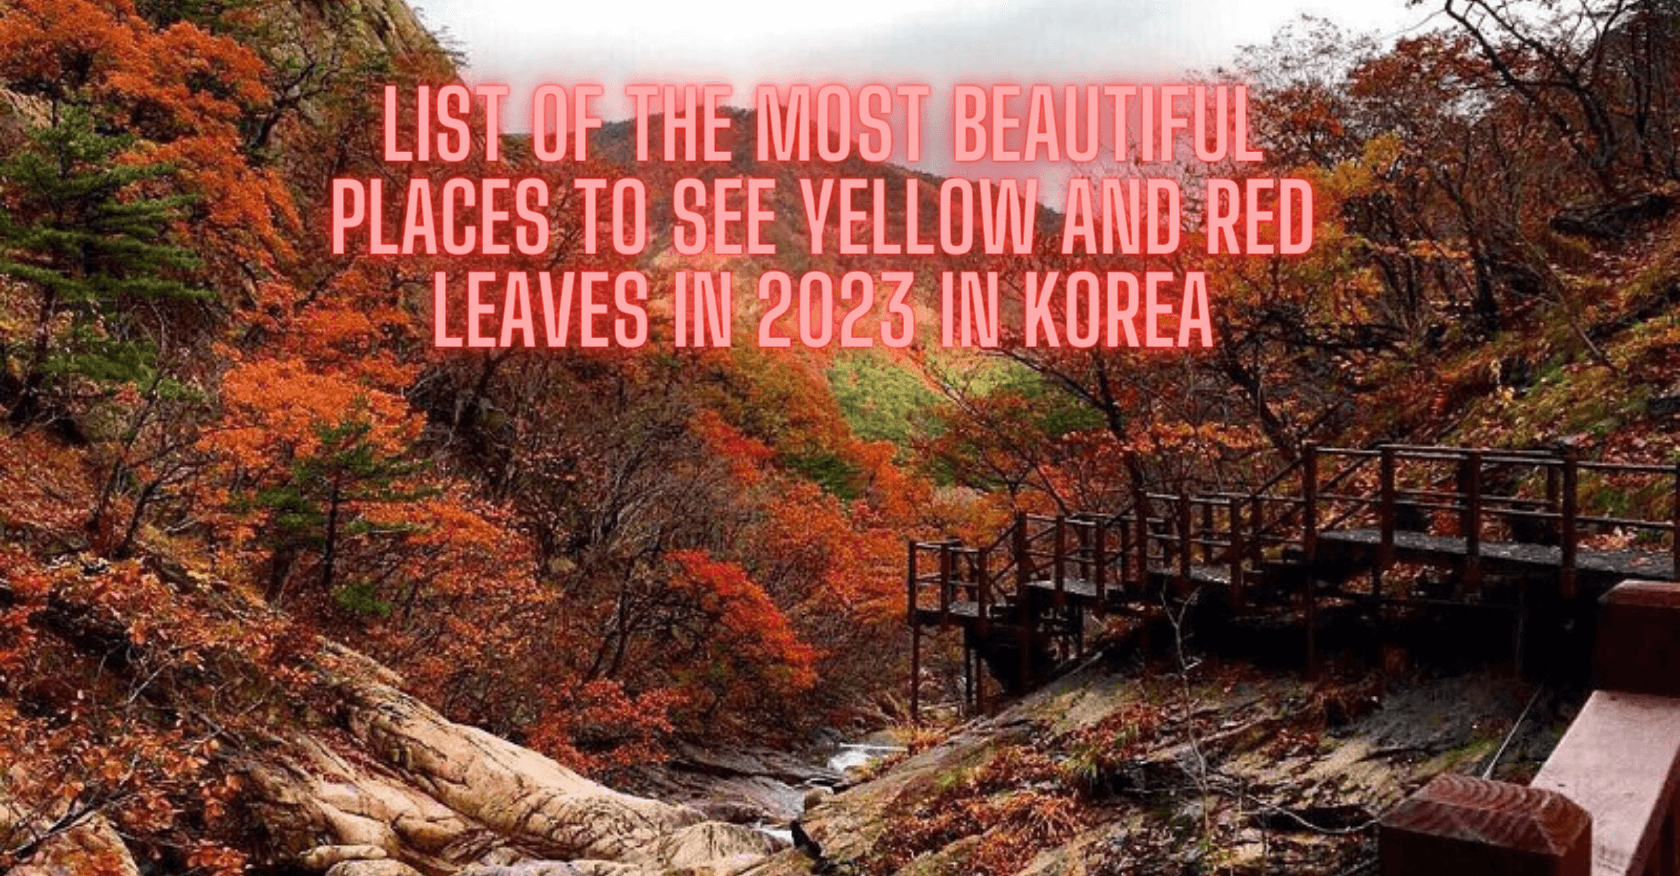 list of the most beautiful places to see yellow and red leaves in 2023 in Korea